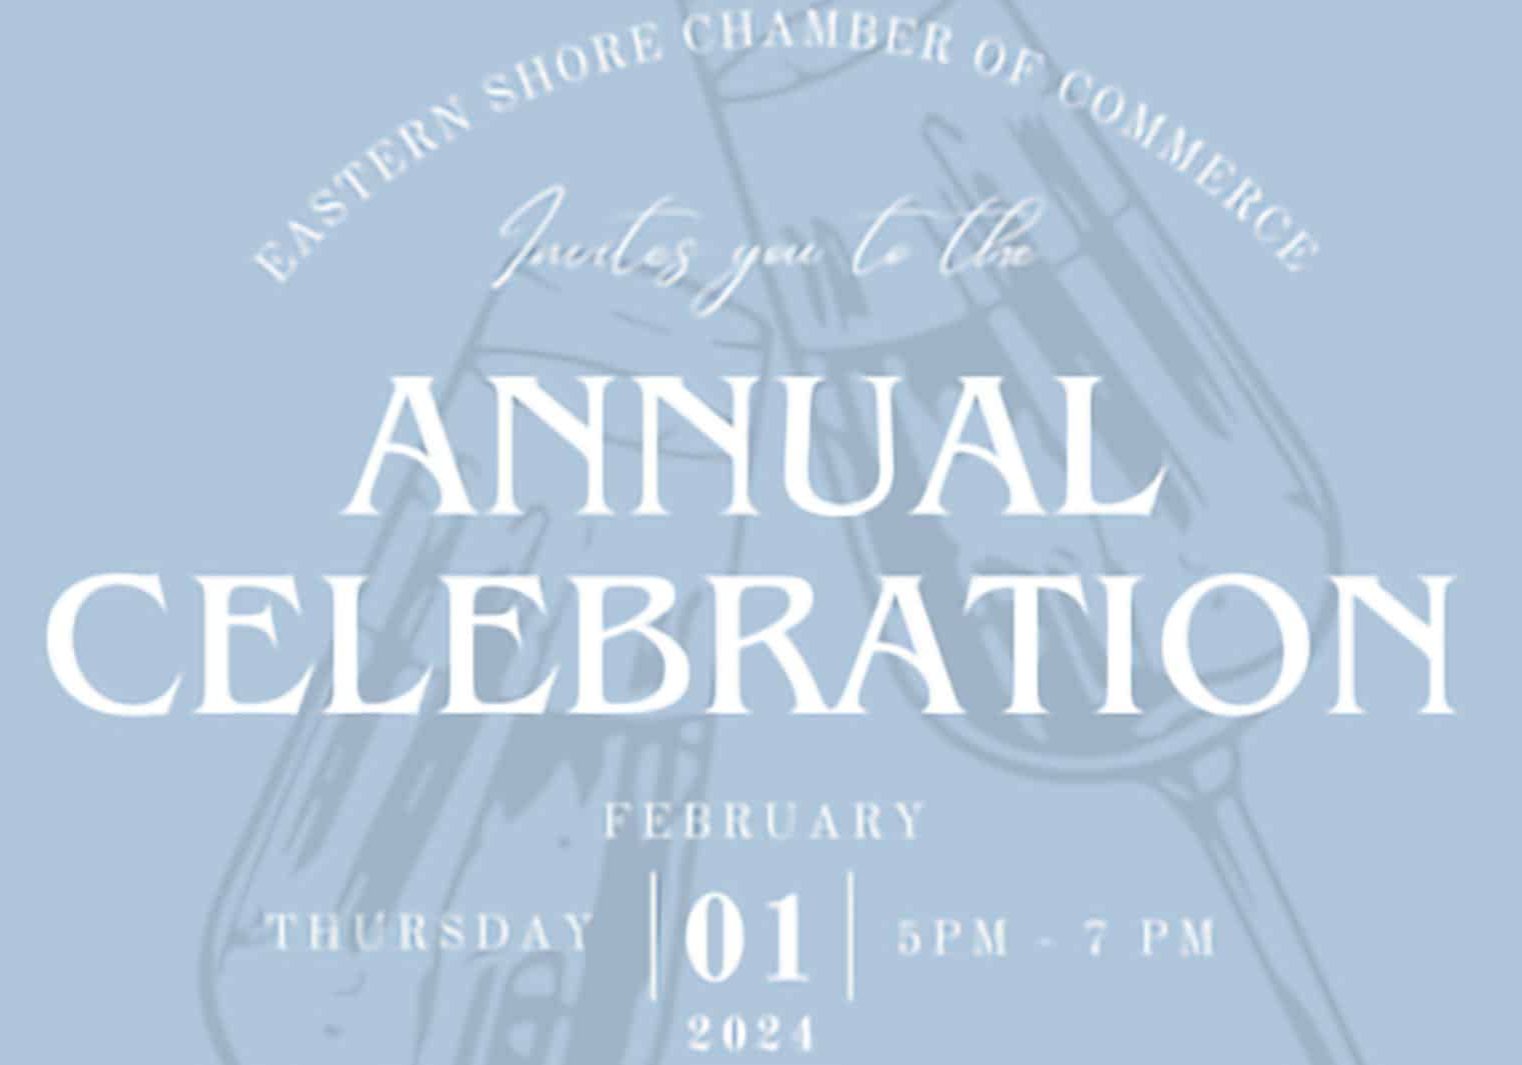 Eastern Shore Chamber 100th Annual Celebration Coming Up